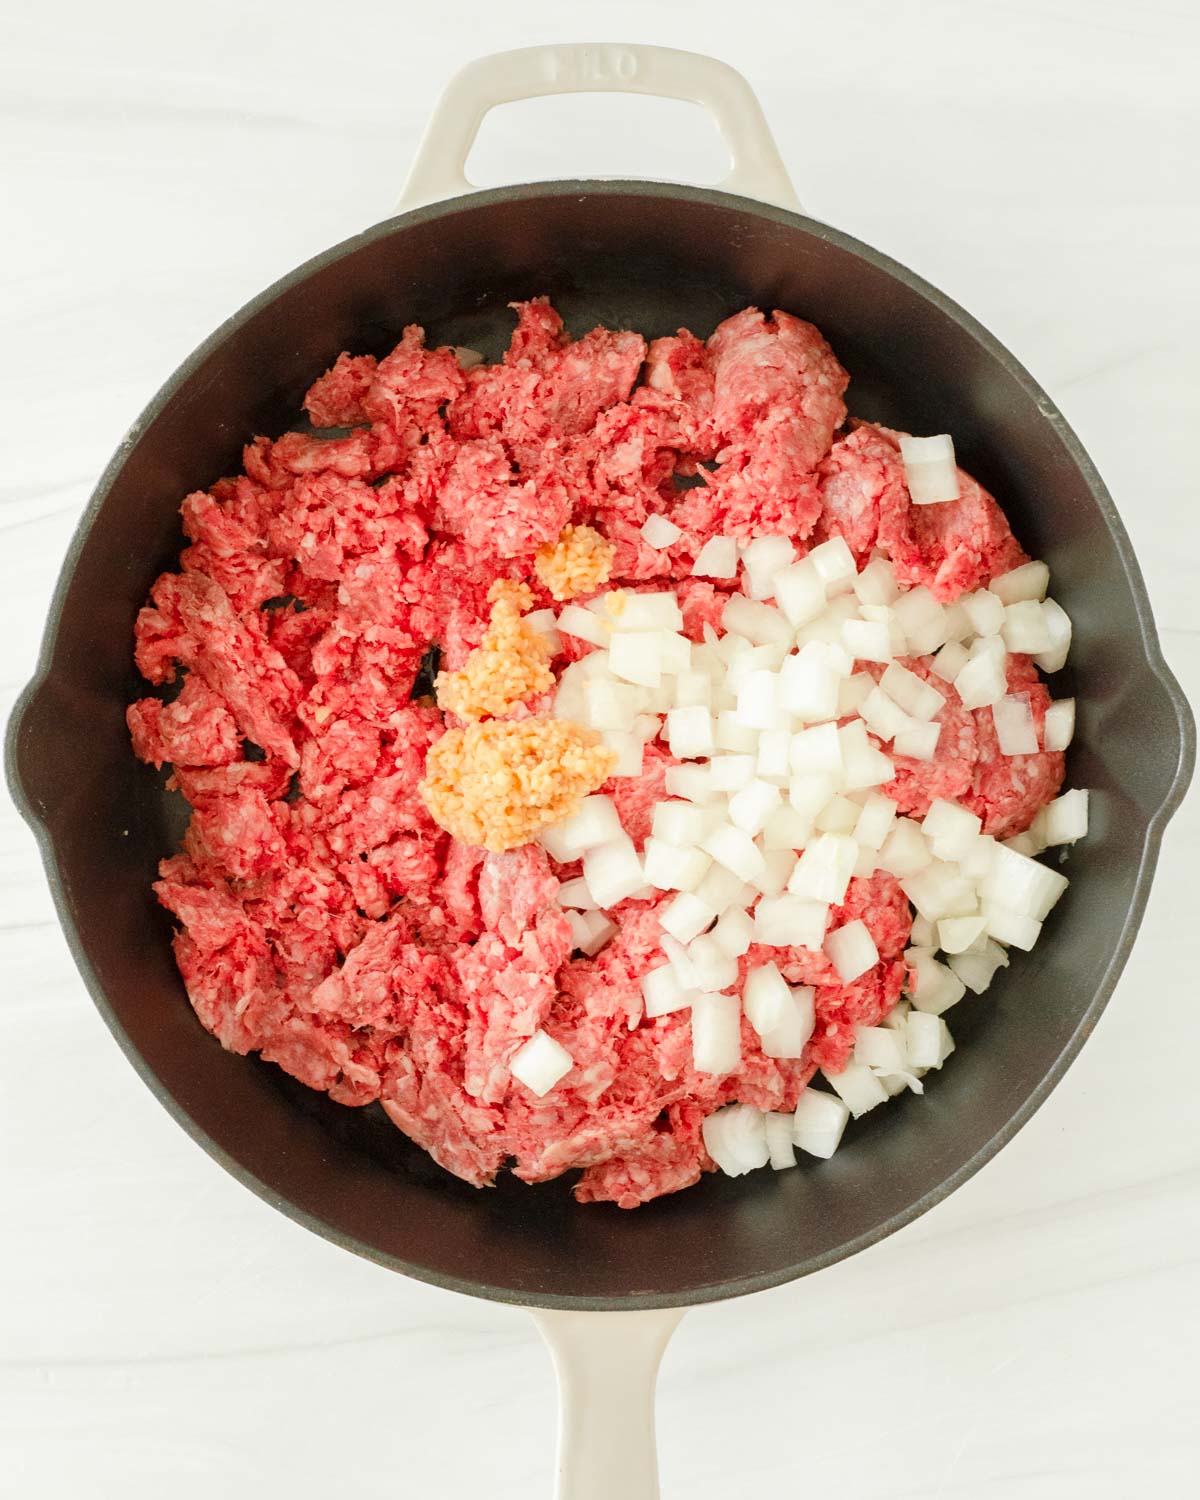 Step 1. Add the ground beef, onion and garlic to the skillet